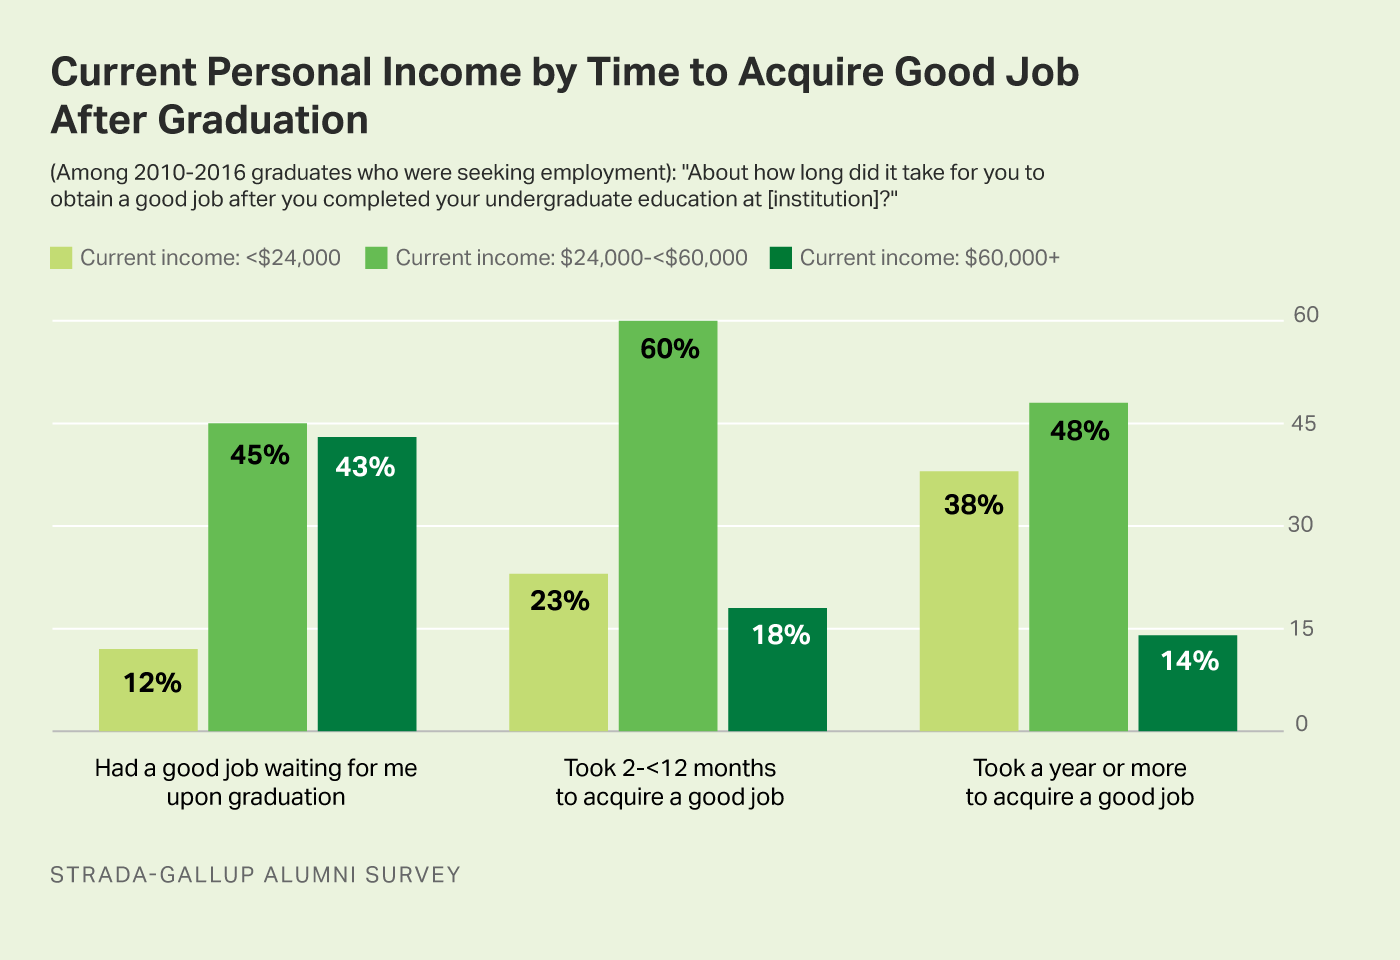 Bar graph. College graduates who had a good job waiting for them at graduation earned more than those who did not have a good job waiting.